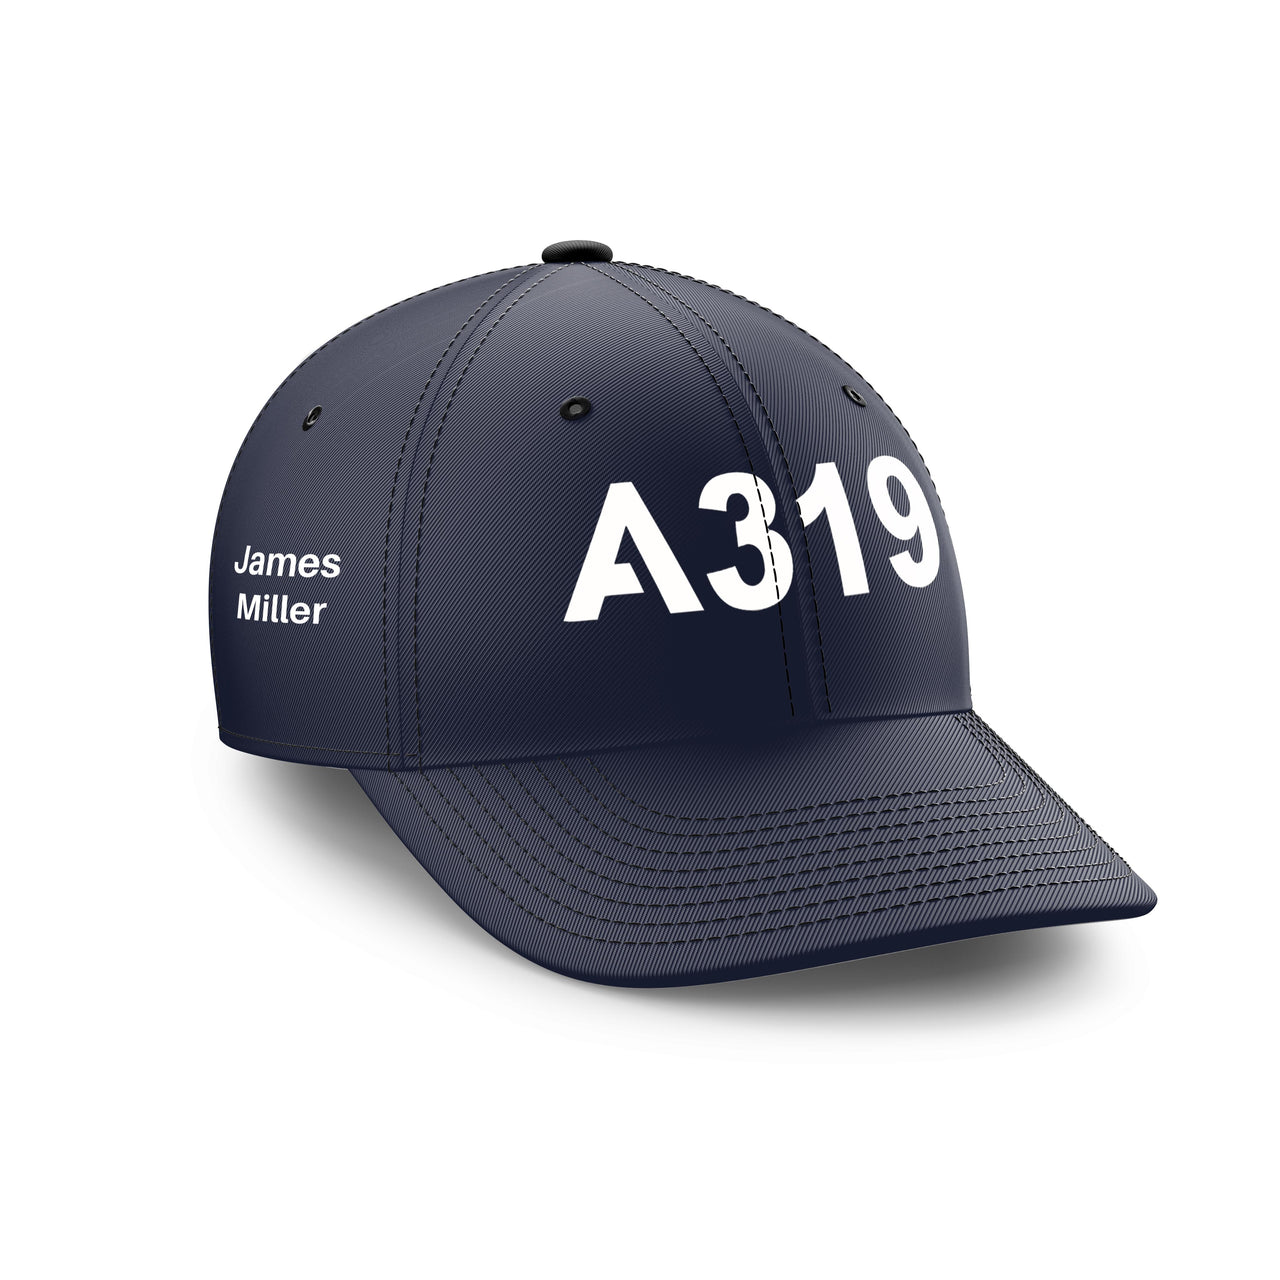 Customizable Name & A319 Flat Text Embroidered Hats